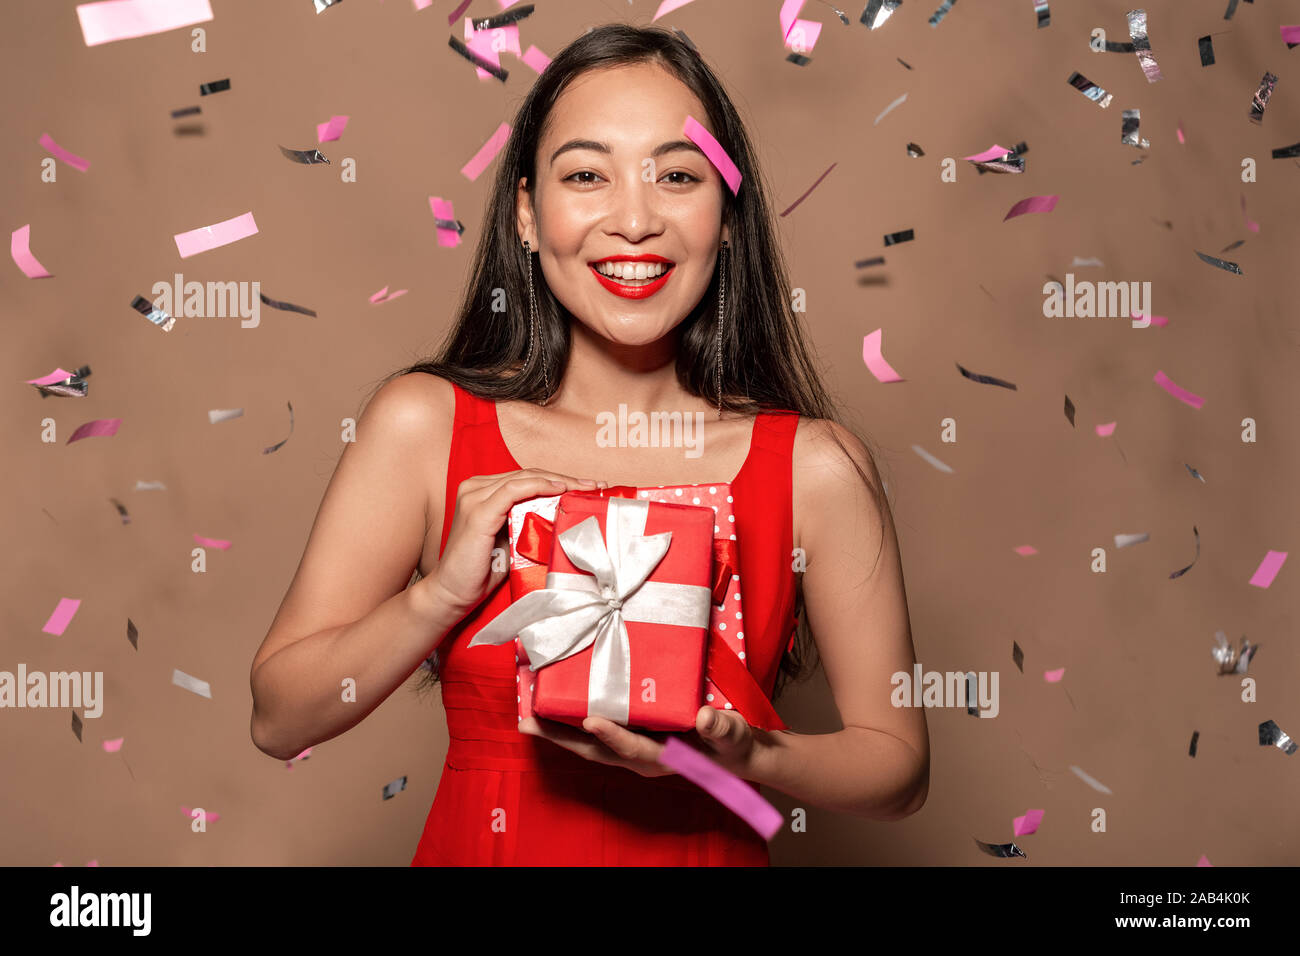 Freestyle. Young girl in dress standing in falling confetti isolated on brown with presents laughing happy Stock Photo